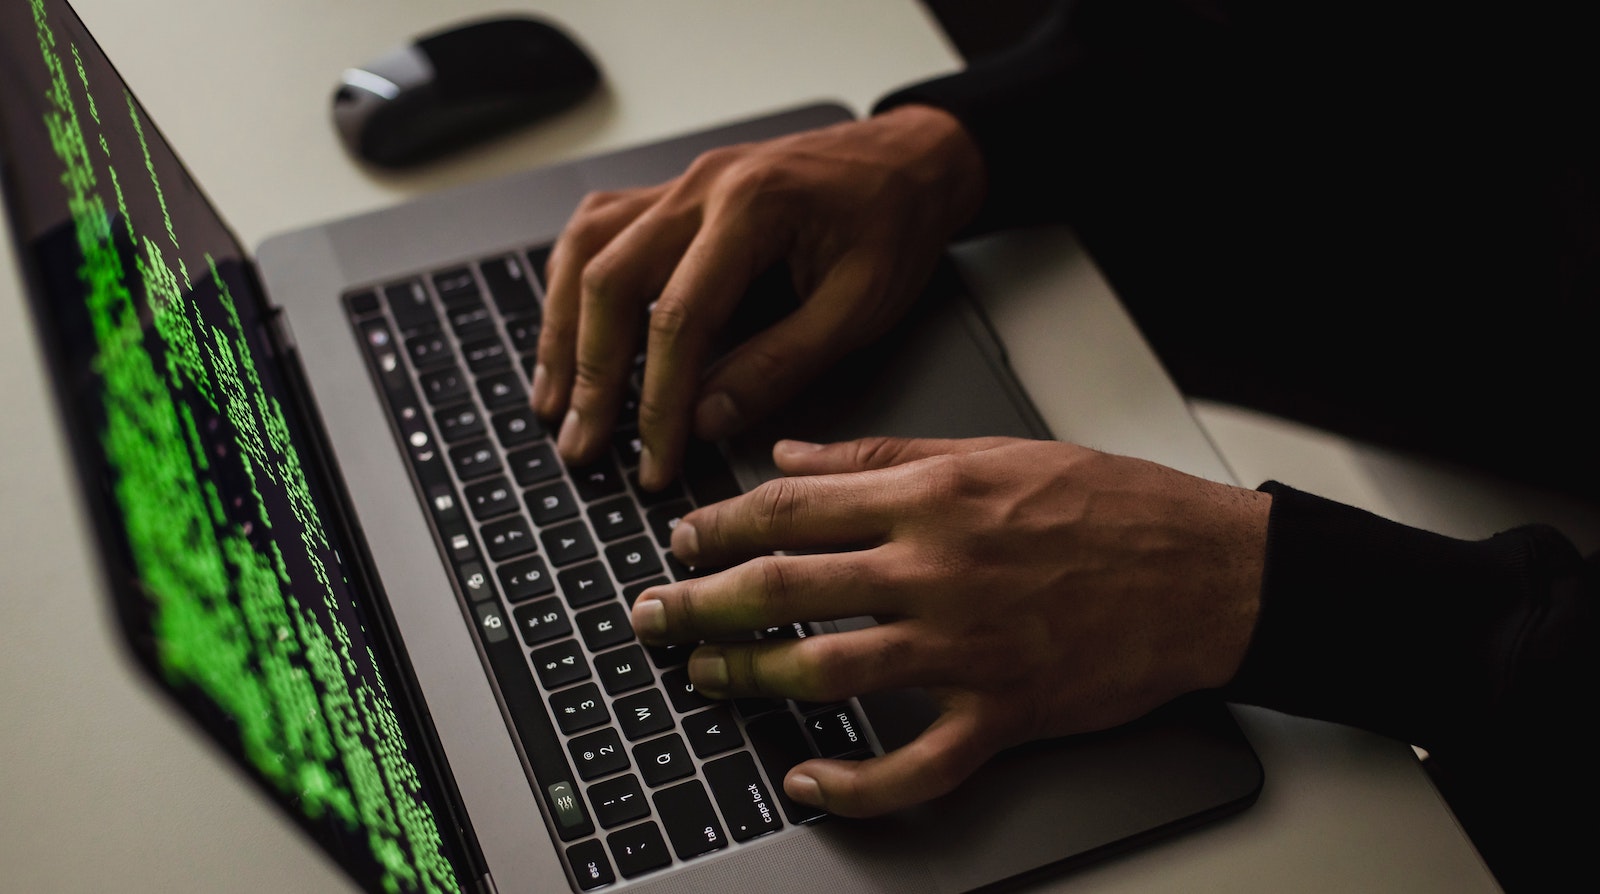 Crop cyber spy hacking system while typing on laptop